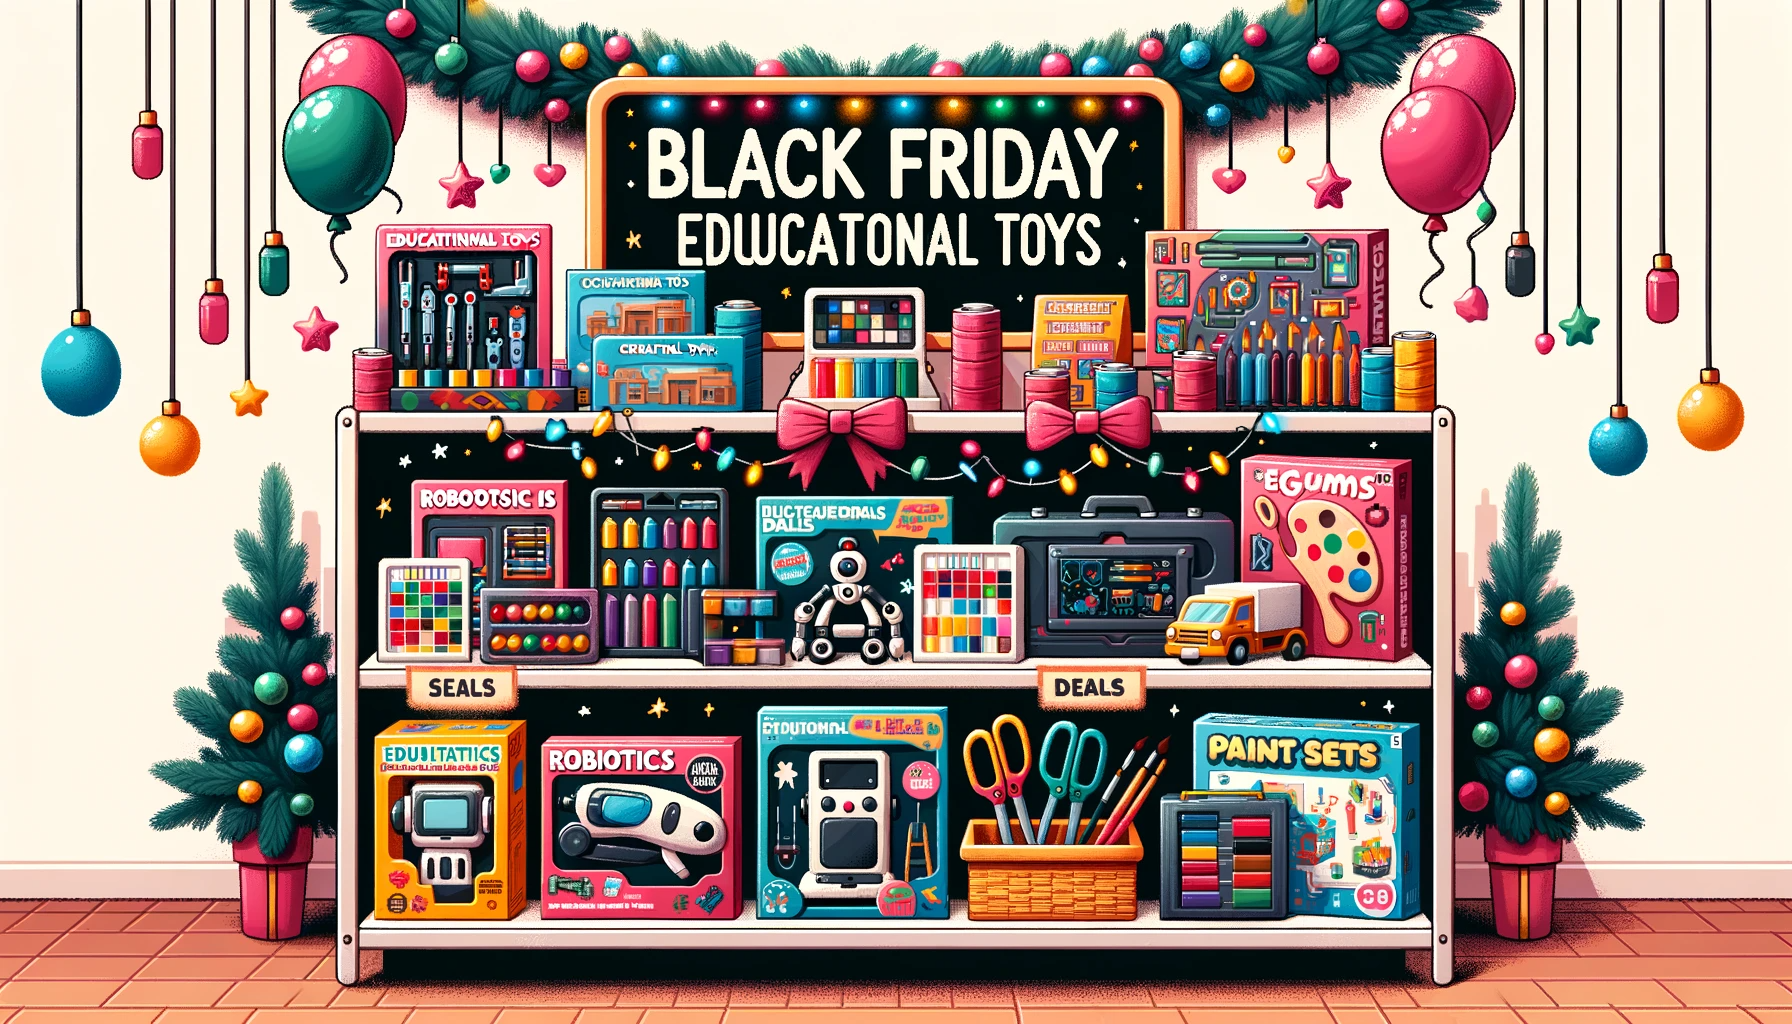 An image showing a variety of educational toys on sale for Black Friday during the Creative Arts and Crafts Deals event, including the black friday educational toys highlighted in the title.